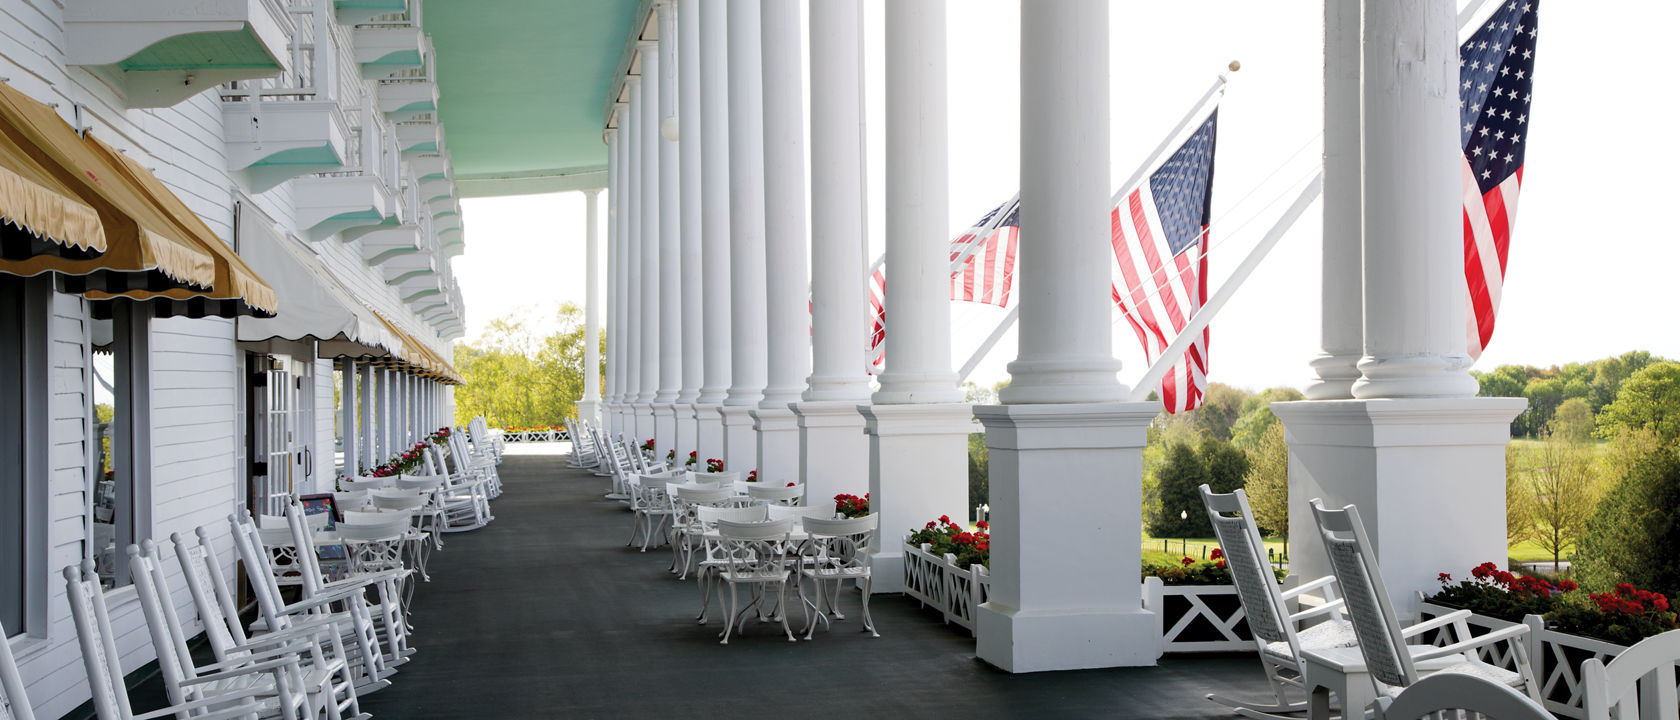 The Grand Hotel's exterior patio with several tall columns with American flags hanging, and places to sit and look at the views.